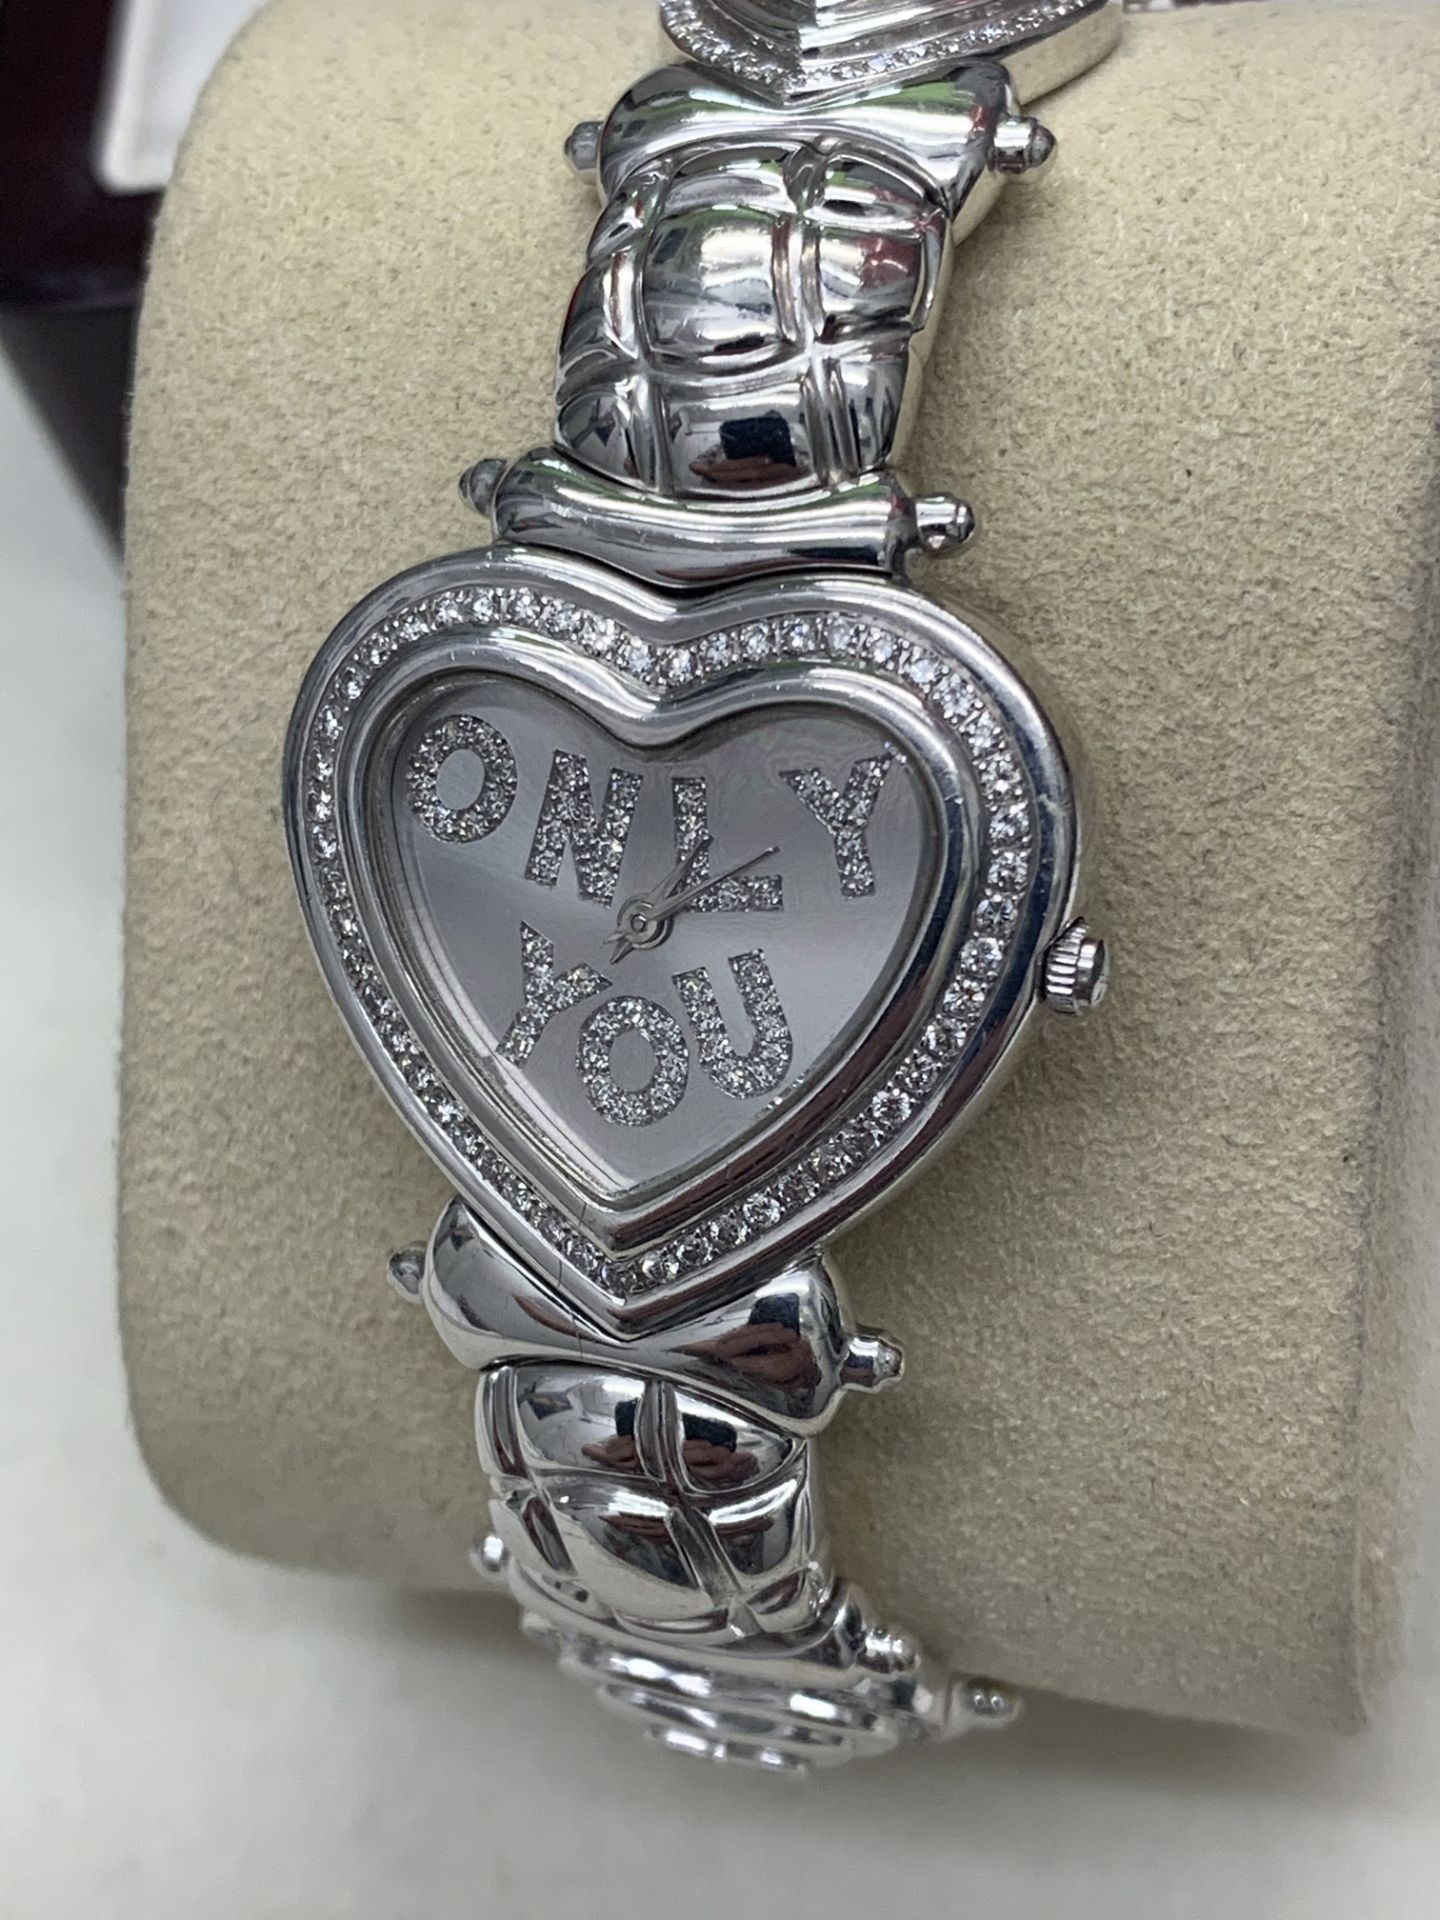 18ct WHITE GOLD & DIAMOND SET GAUTIER HEART SHAPED "ONLY YOU" WATCH - Image 2 of 9